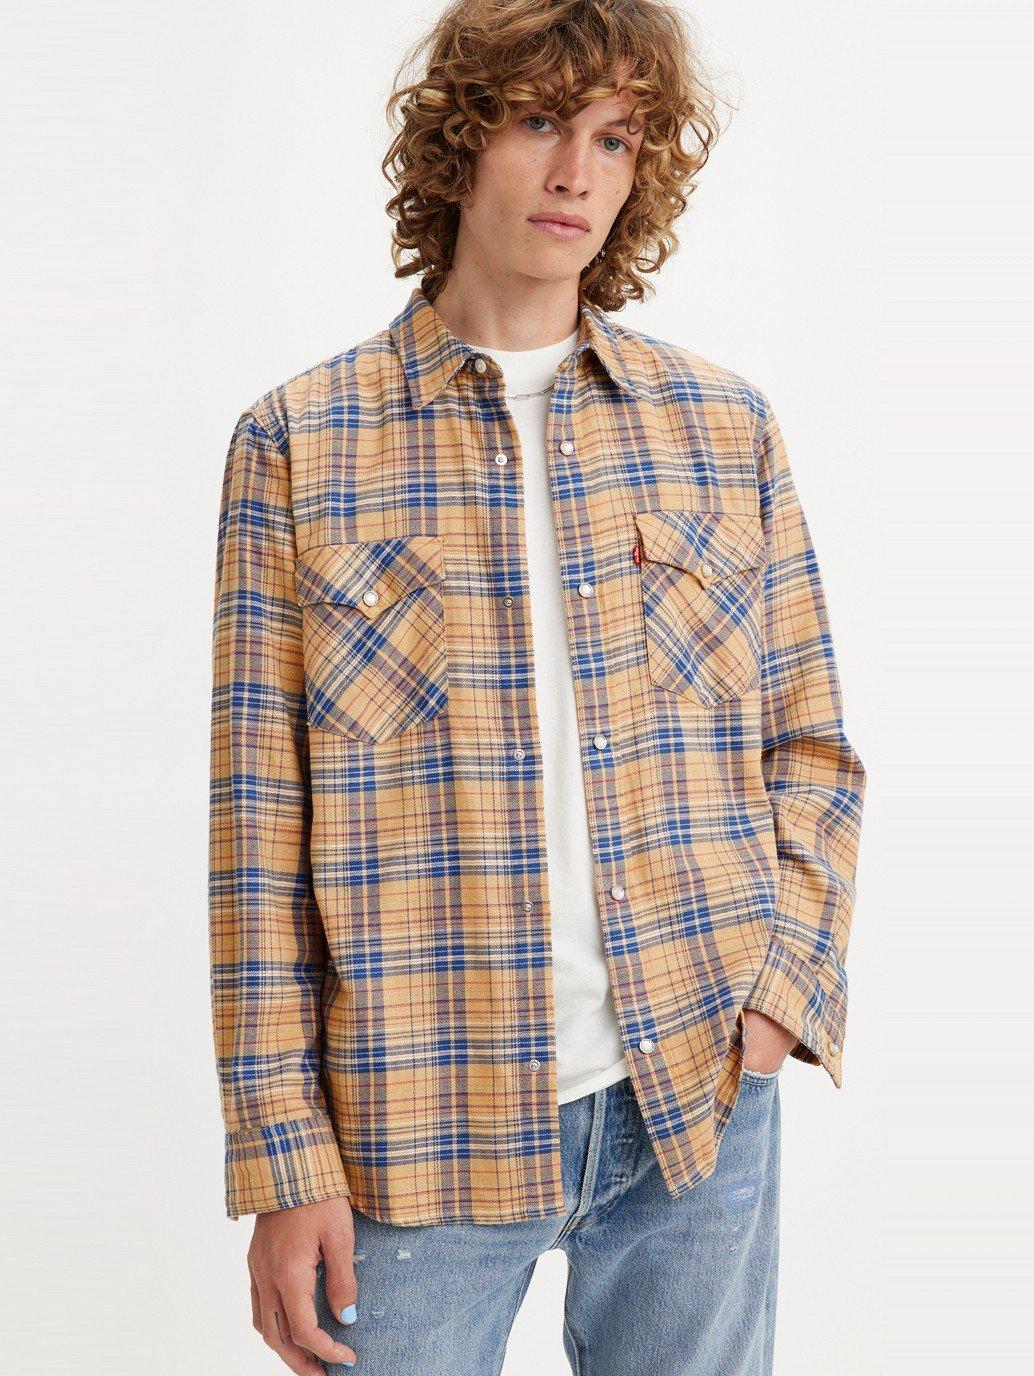 Buy Levi's® Men's Relaxed Fit Western Shirt | Levi’s® Official Online ...